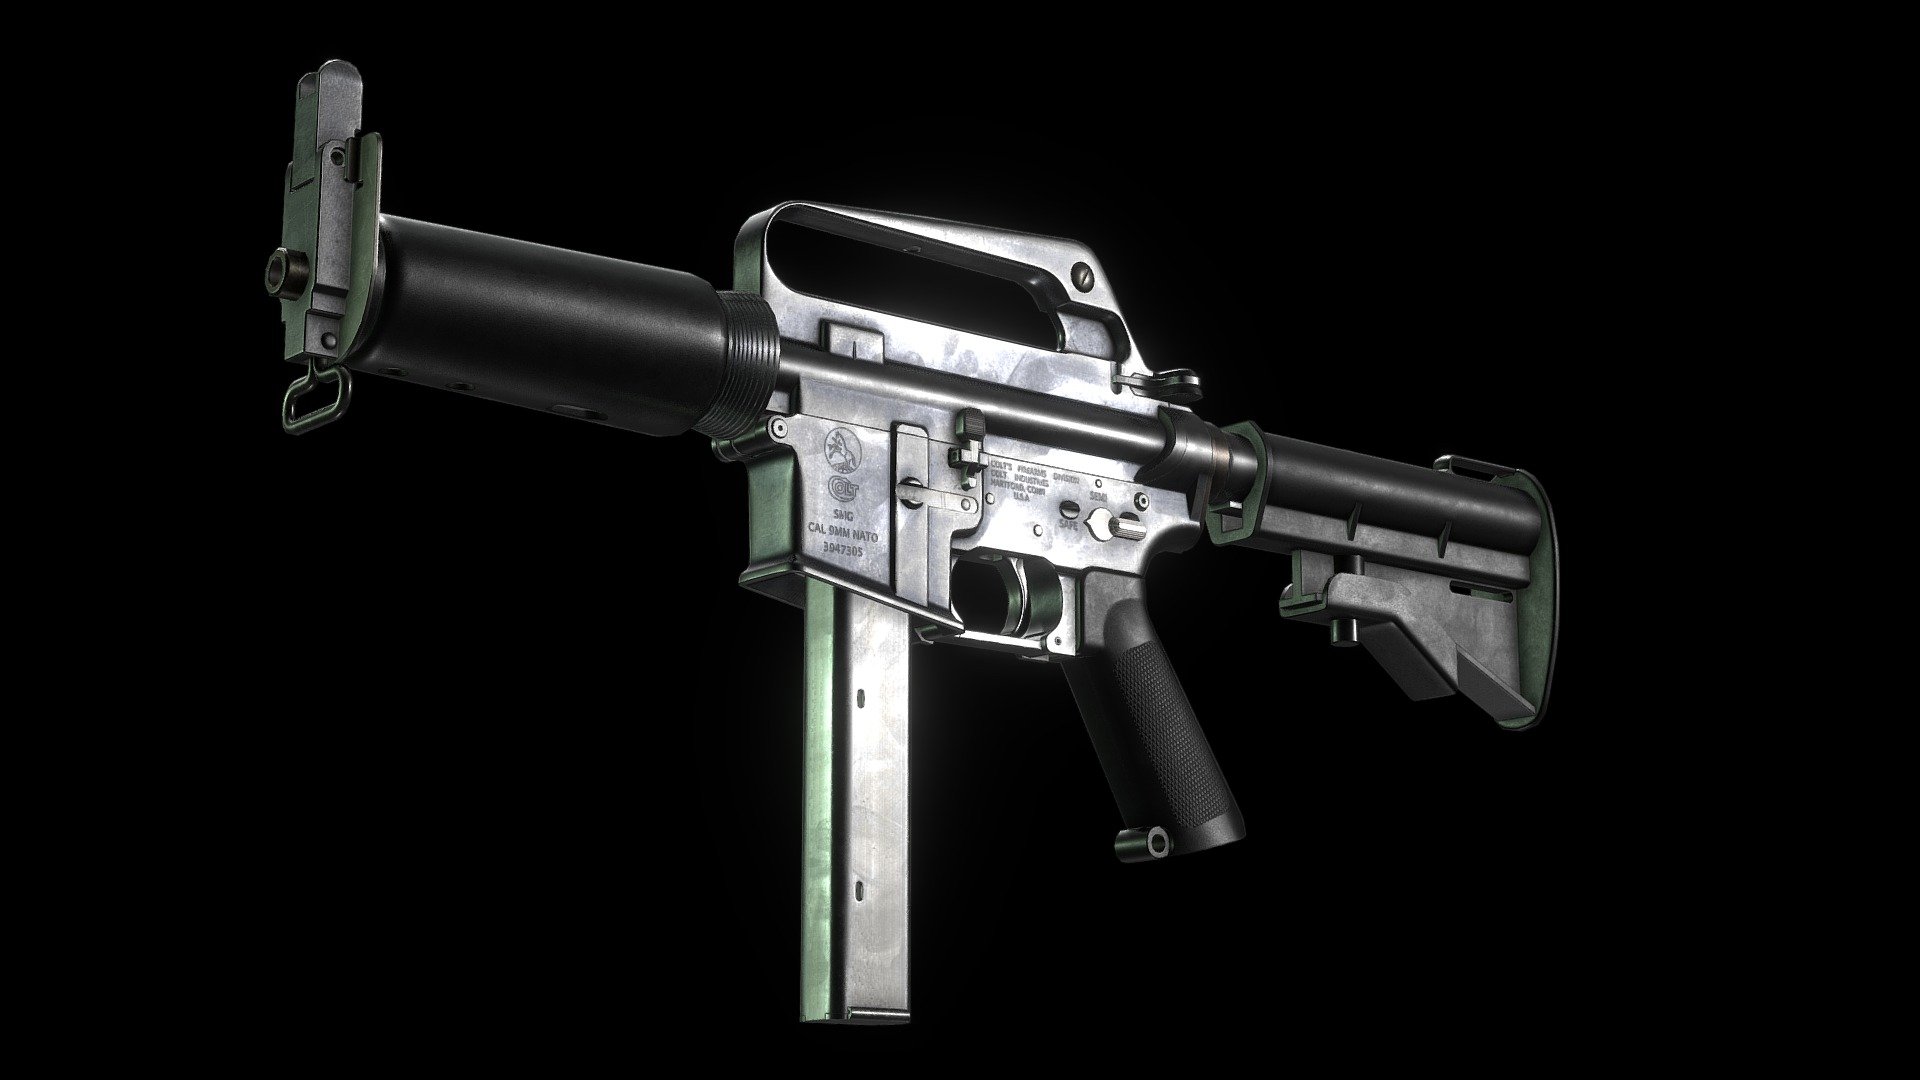 A very interesting looking SMG (imo). I had made this exact weapon in the past, decided to re-create it&hellip;
Learned quite a lot about modelling complex shapes in highpoly with this project, was a challenge at first but manage to get the ball rolling soon after. I used a few different reference images for the materials, so it turned out to be a blend between the old M16a1 and a modern day AR15 looking surface.

19,732 tris    8192x8192 - Colt 633/635 DOE - 3D model by Minde (@mufake) 3d model